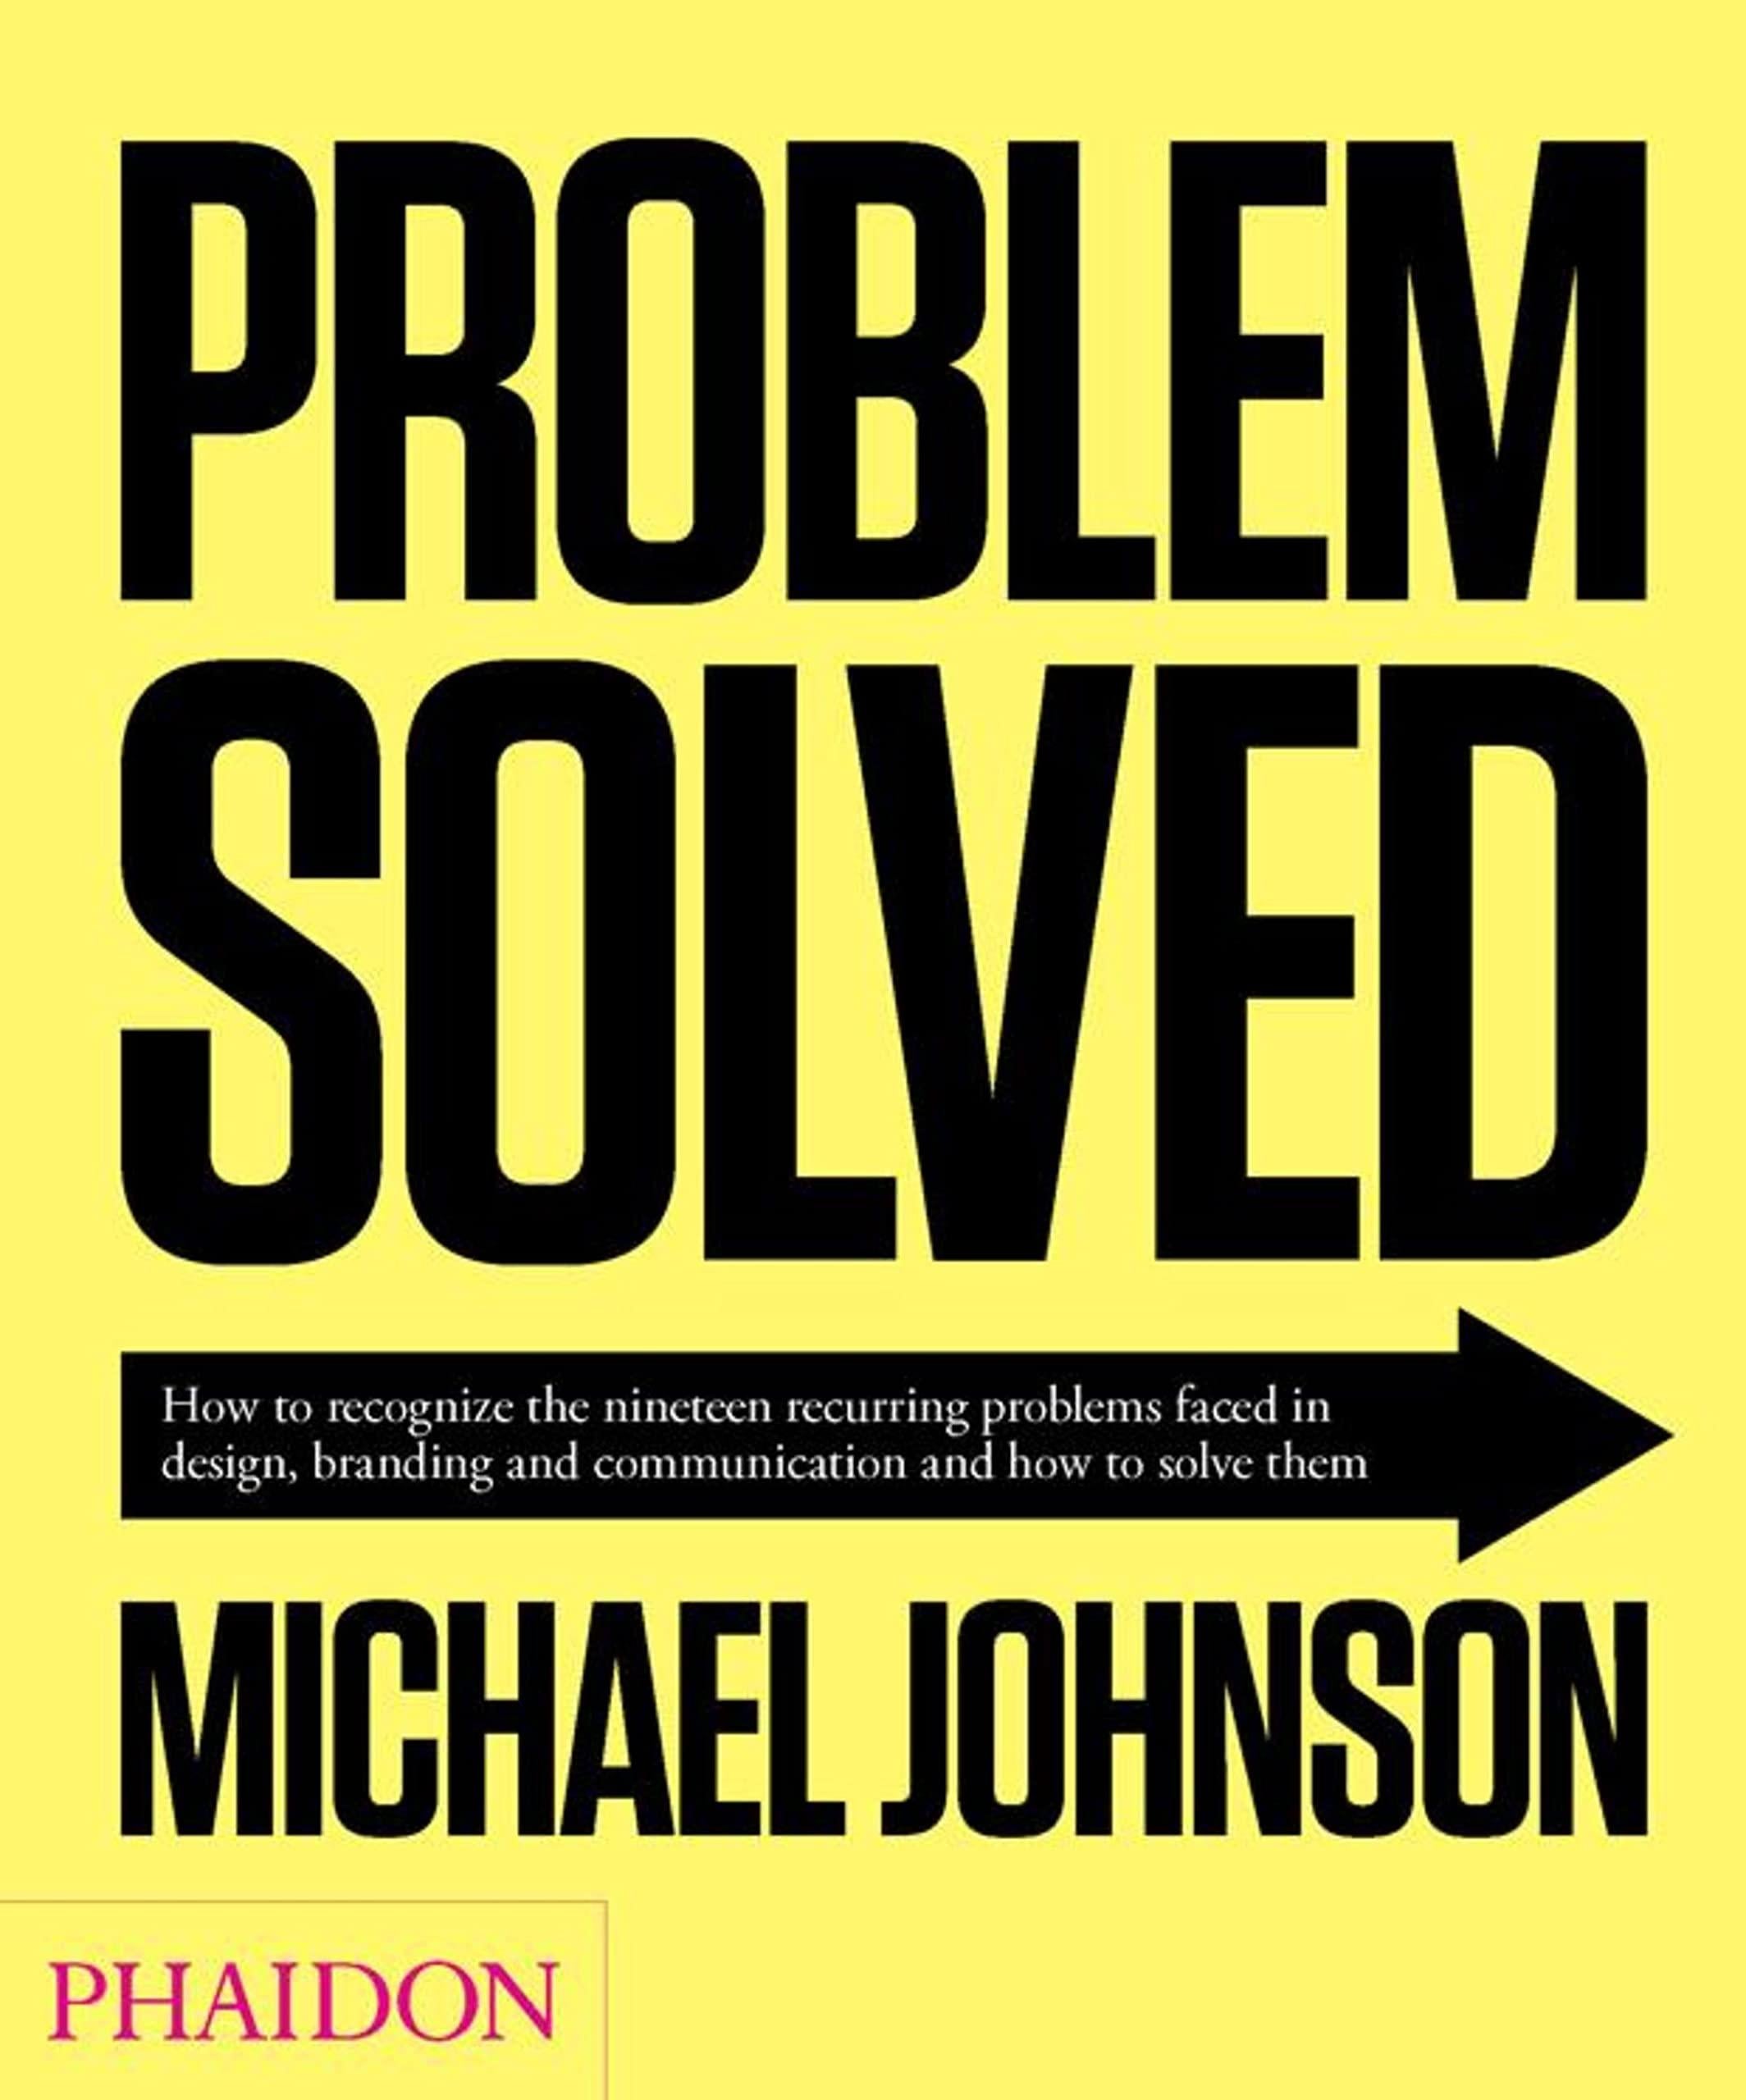 Modern In Stock in Los Angeles, Problem Solved by Michael Johnson, Phaidon